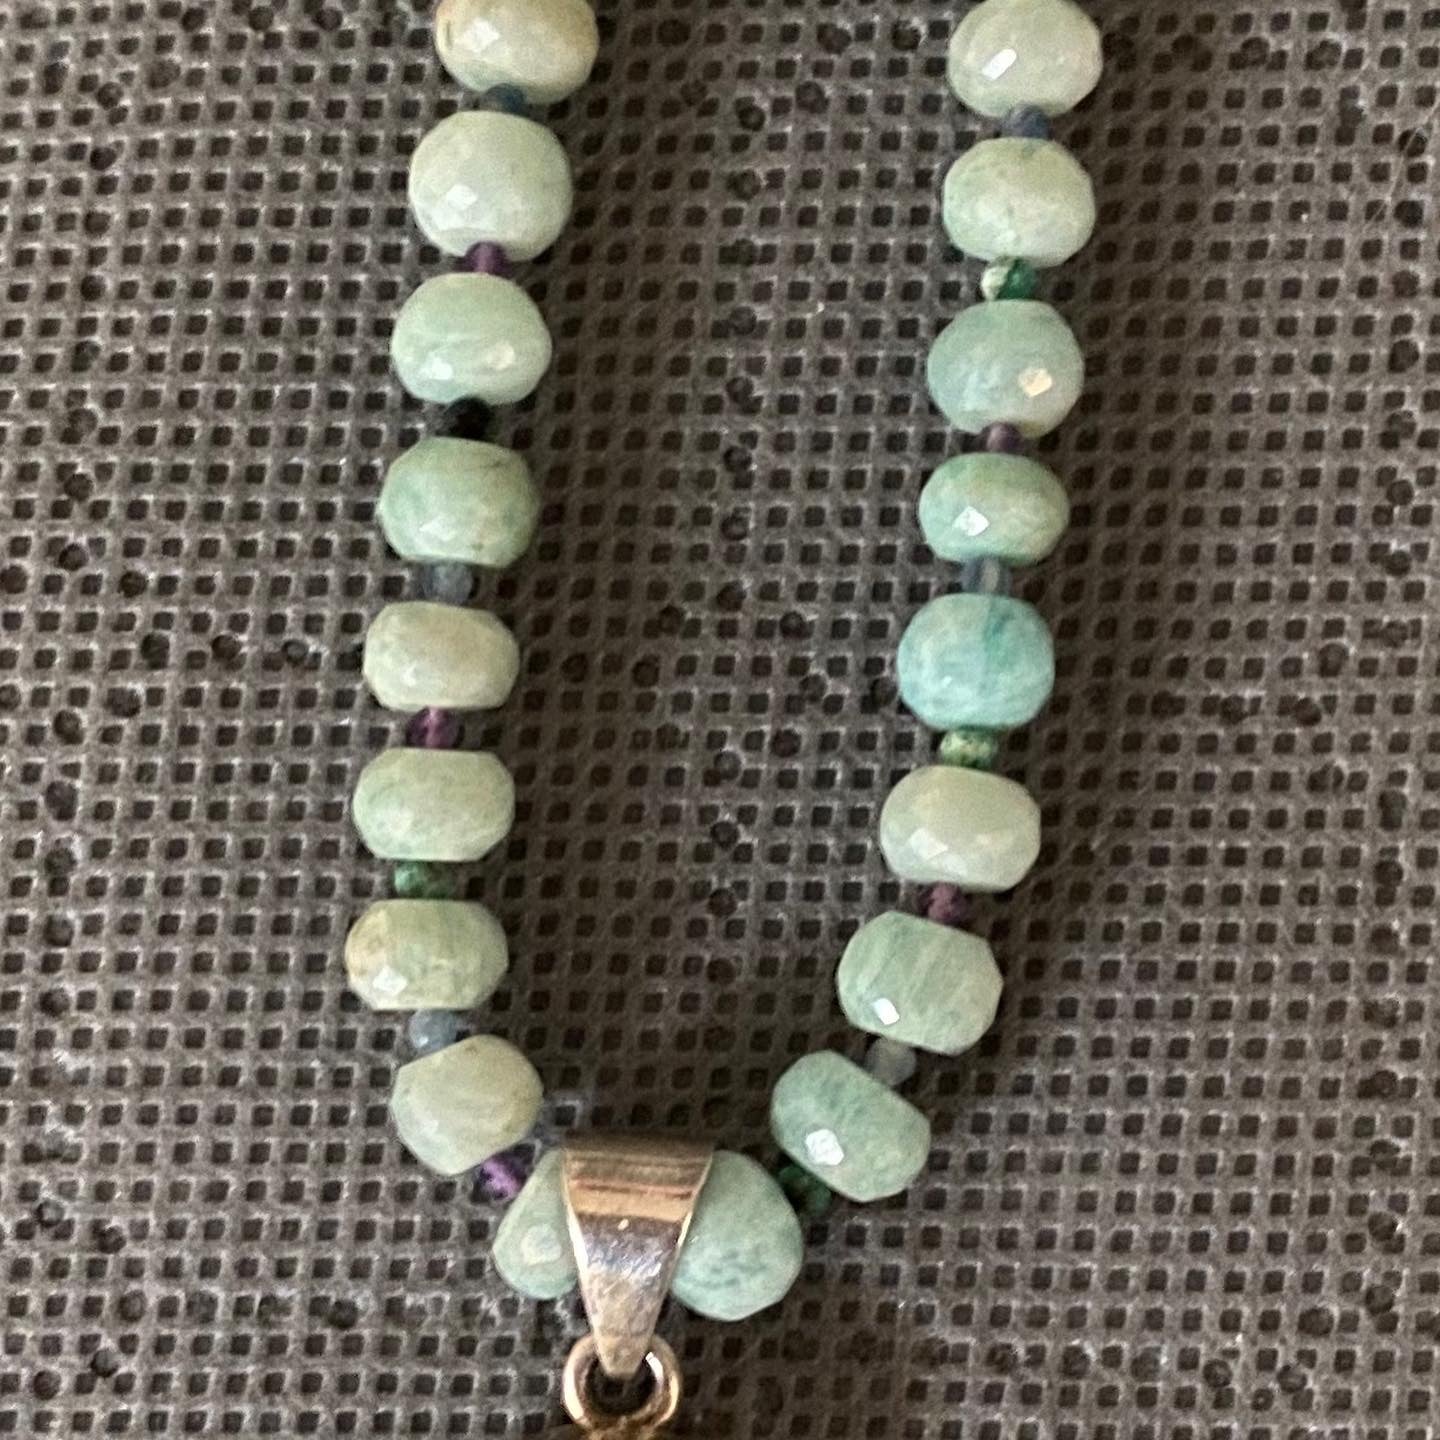 Chrysoprase, Kyanite, Turquoise and Amethyst Necklace